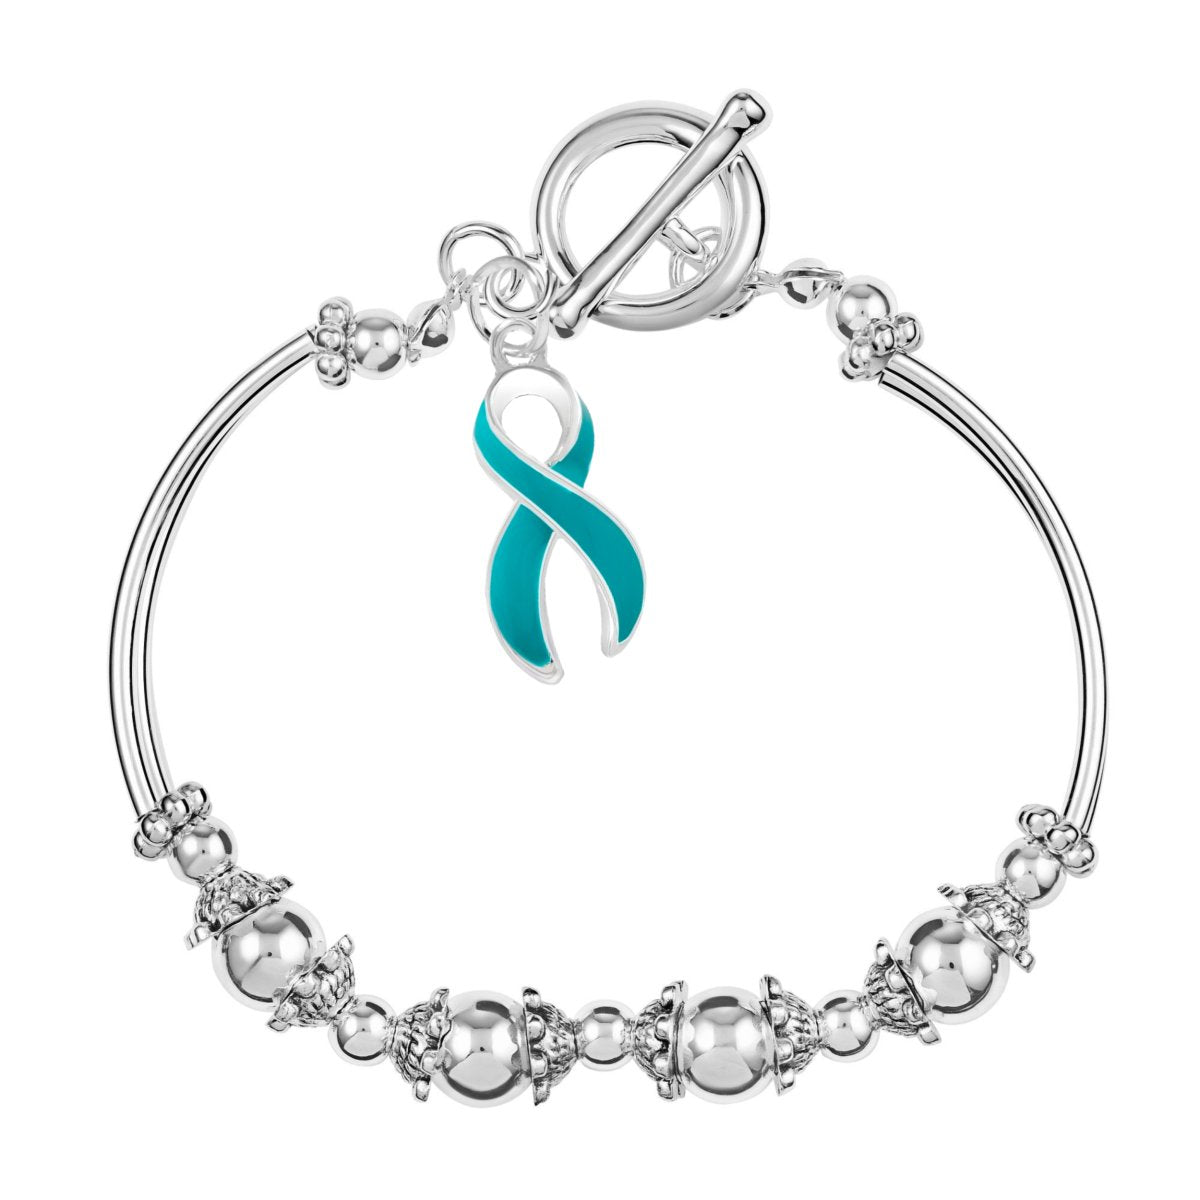 Teal Ribbon Charm Partial Beaded Bracelets - Fundraising For A Cause